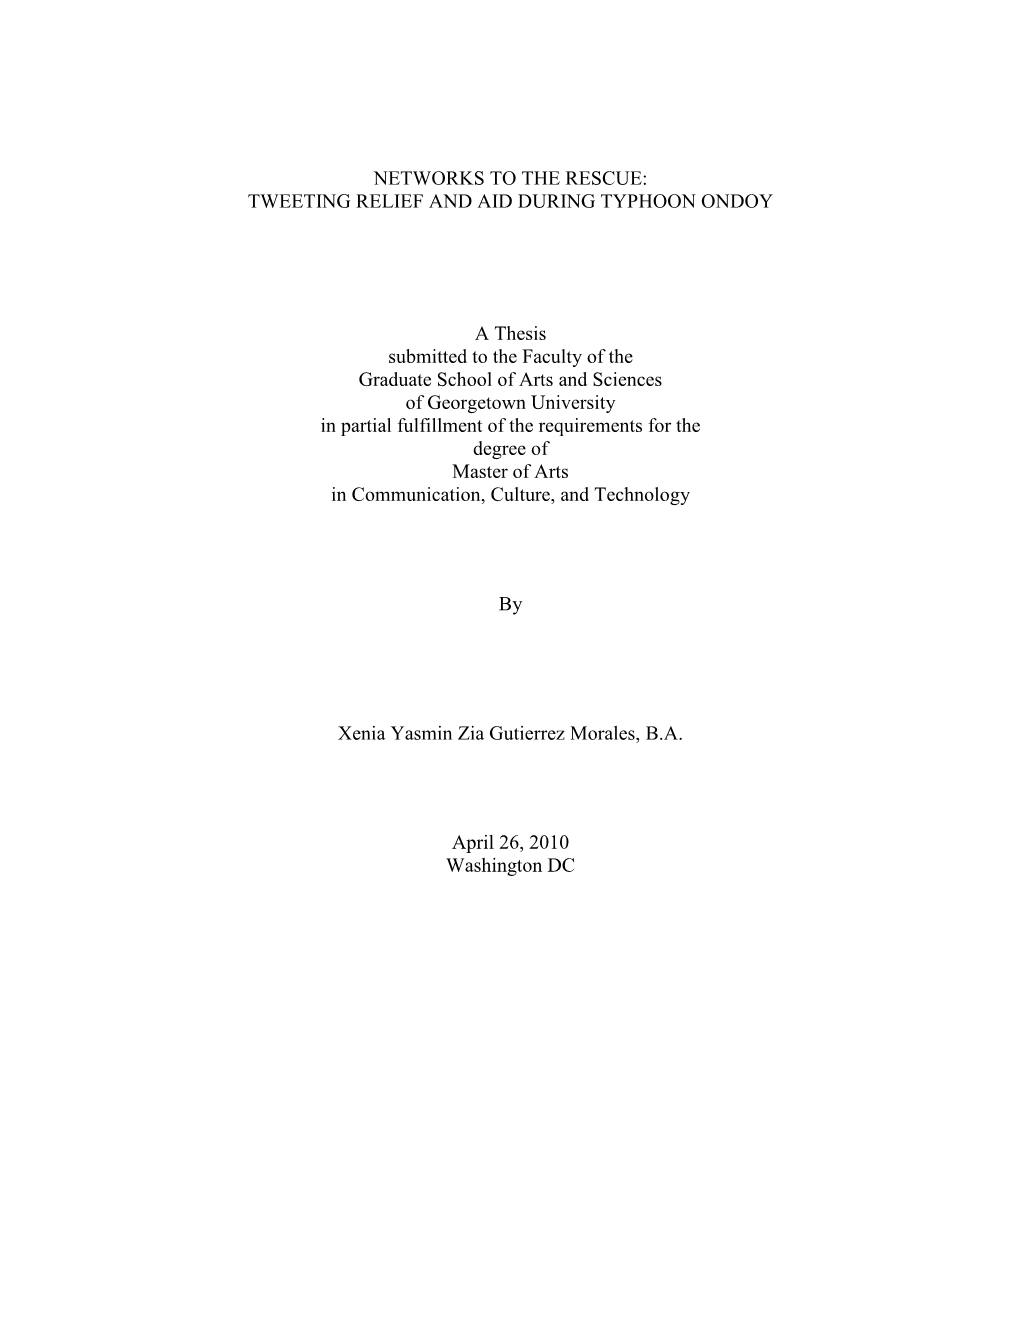 TWEETING RELIEF and AID DURING TYPHOON ONDOY a Thesis Submitted to the Faculty of the Graduate School Of